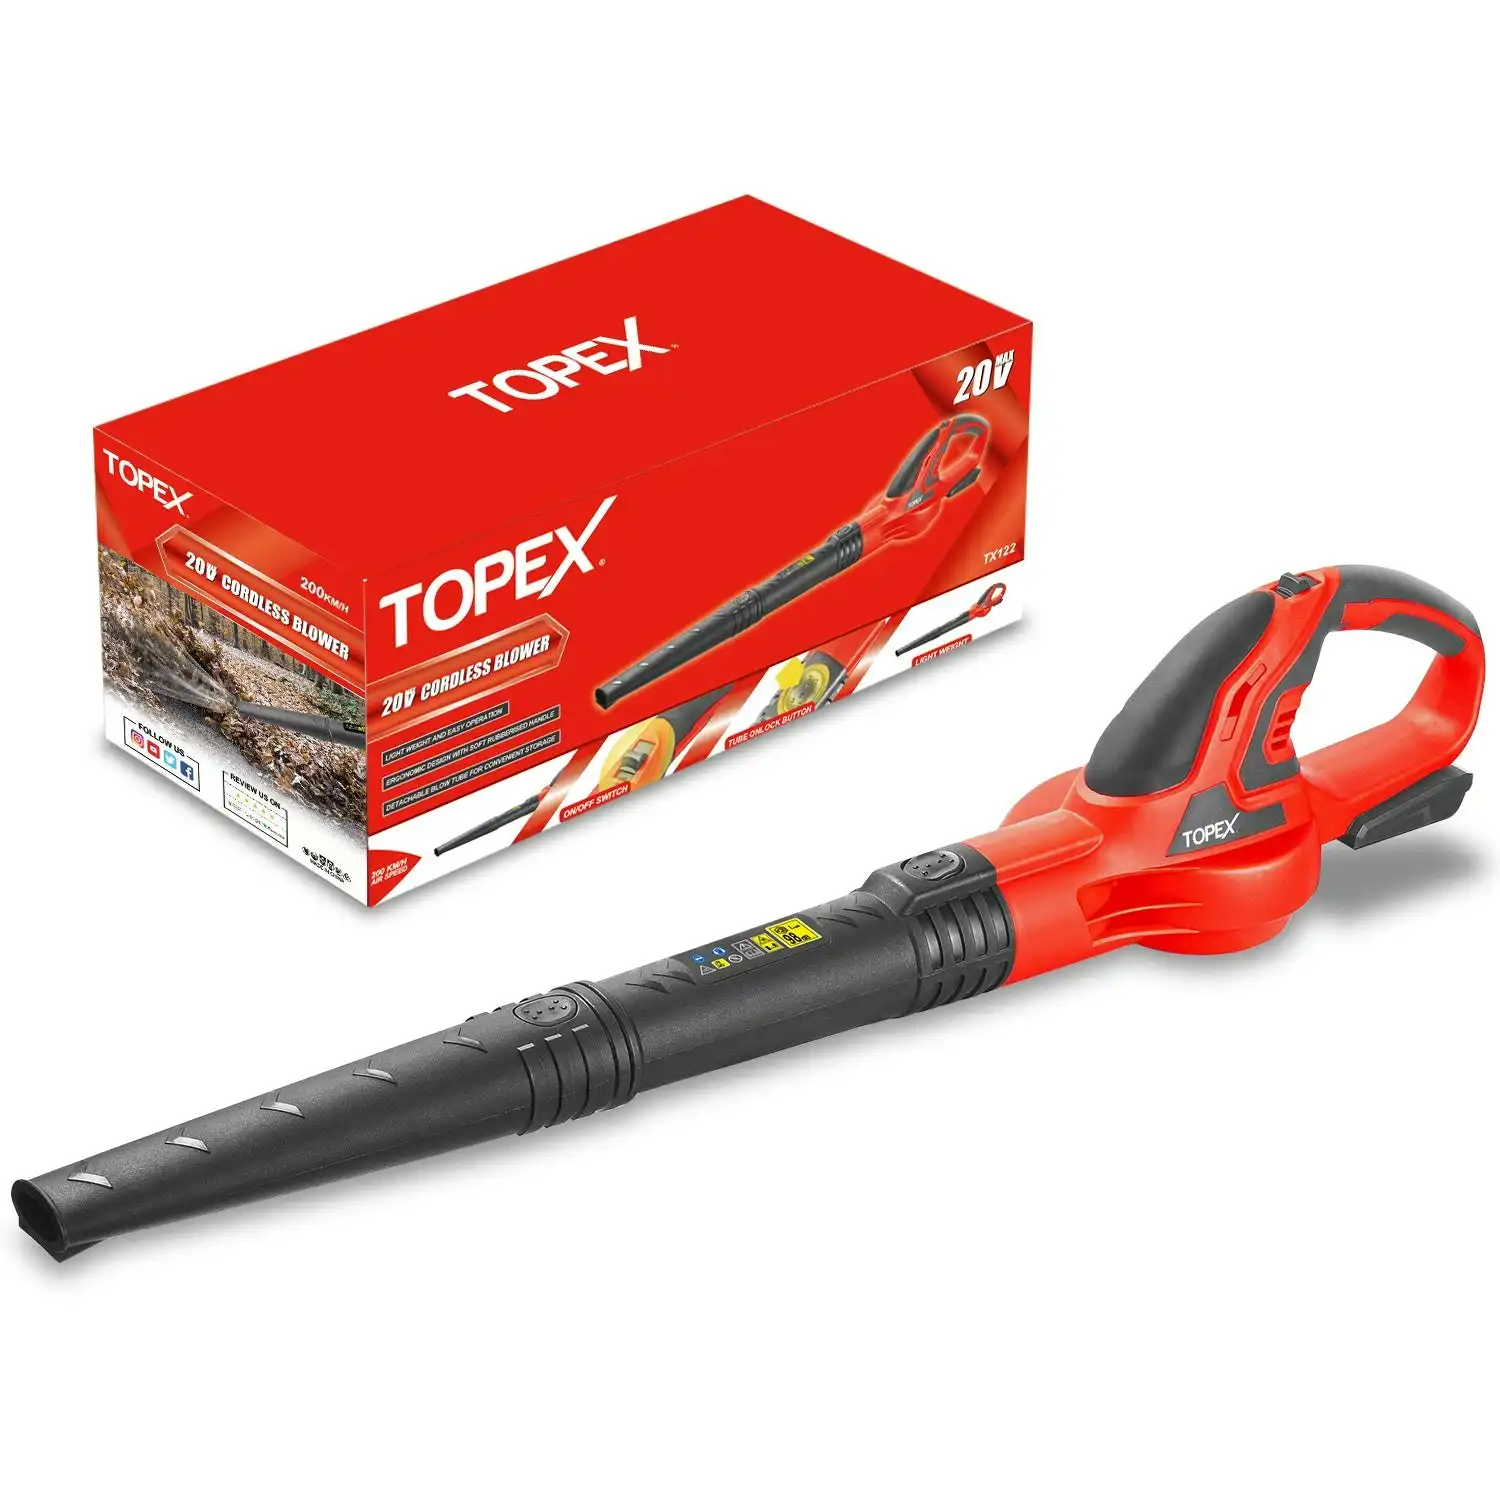 Topex 20V Cordless Leaf Blower 200Km/h Garden Dust Lightweight Skin Only without Battery